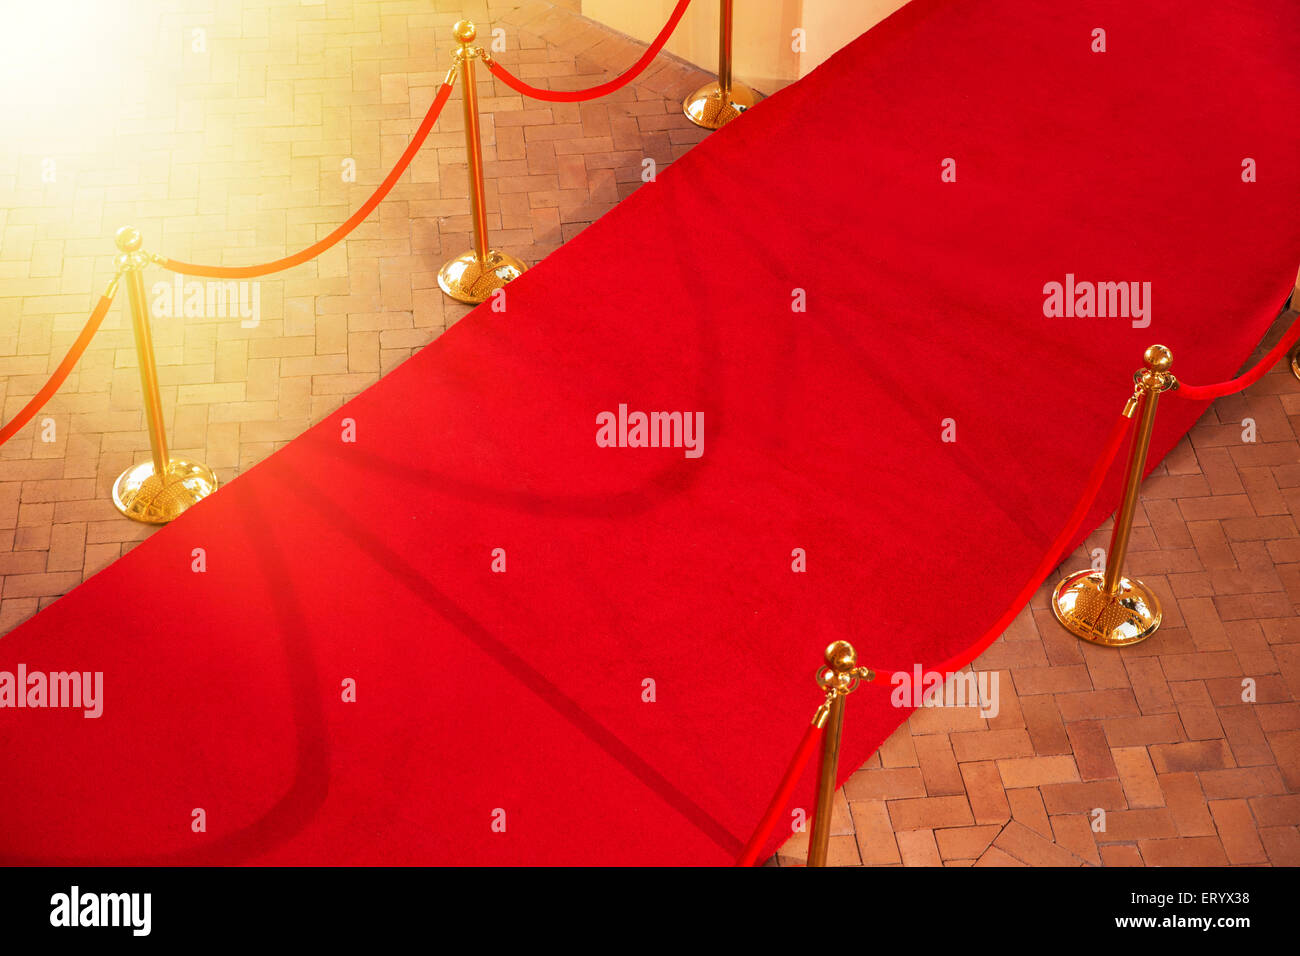 High angle view of empty red carpet Stock Photo